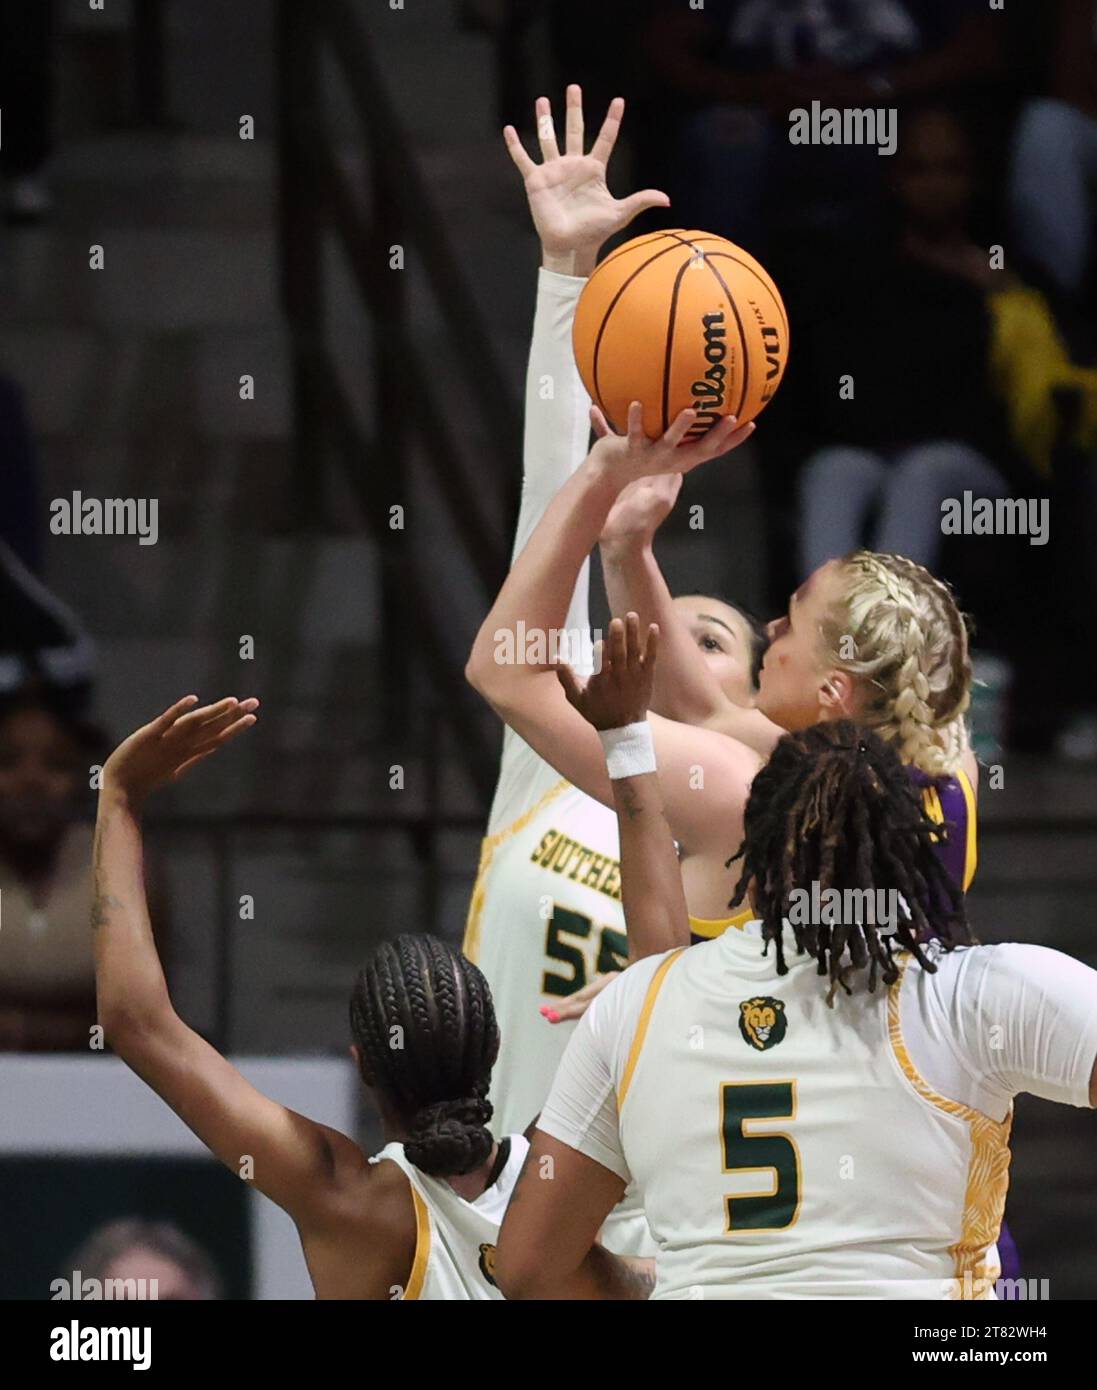 Hammond, USA. 17th Nov, 2023. LSU Lady Tigers guard Hailey Van Lith (11) shoots a layup against SE Louisiana Lady Lions guard Hailey Giaratano (55) during a women's college basketball game at the University Center in Hammond, Louisiana on Friday, November 17, 2023. (Photo by Peter G. Forest/Sipa USA) Credit: Sipa USA/Alamy Live News Stock Photo